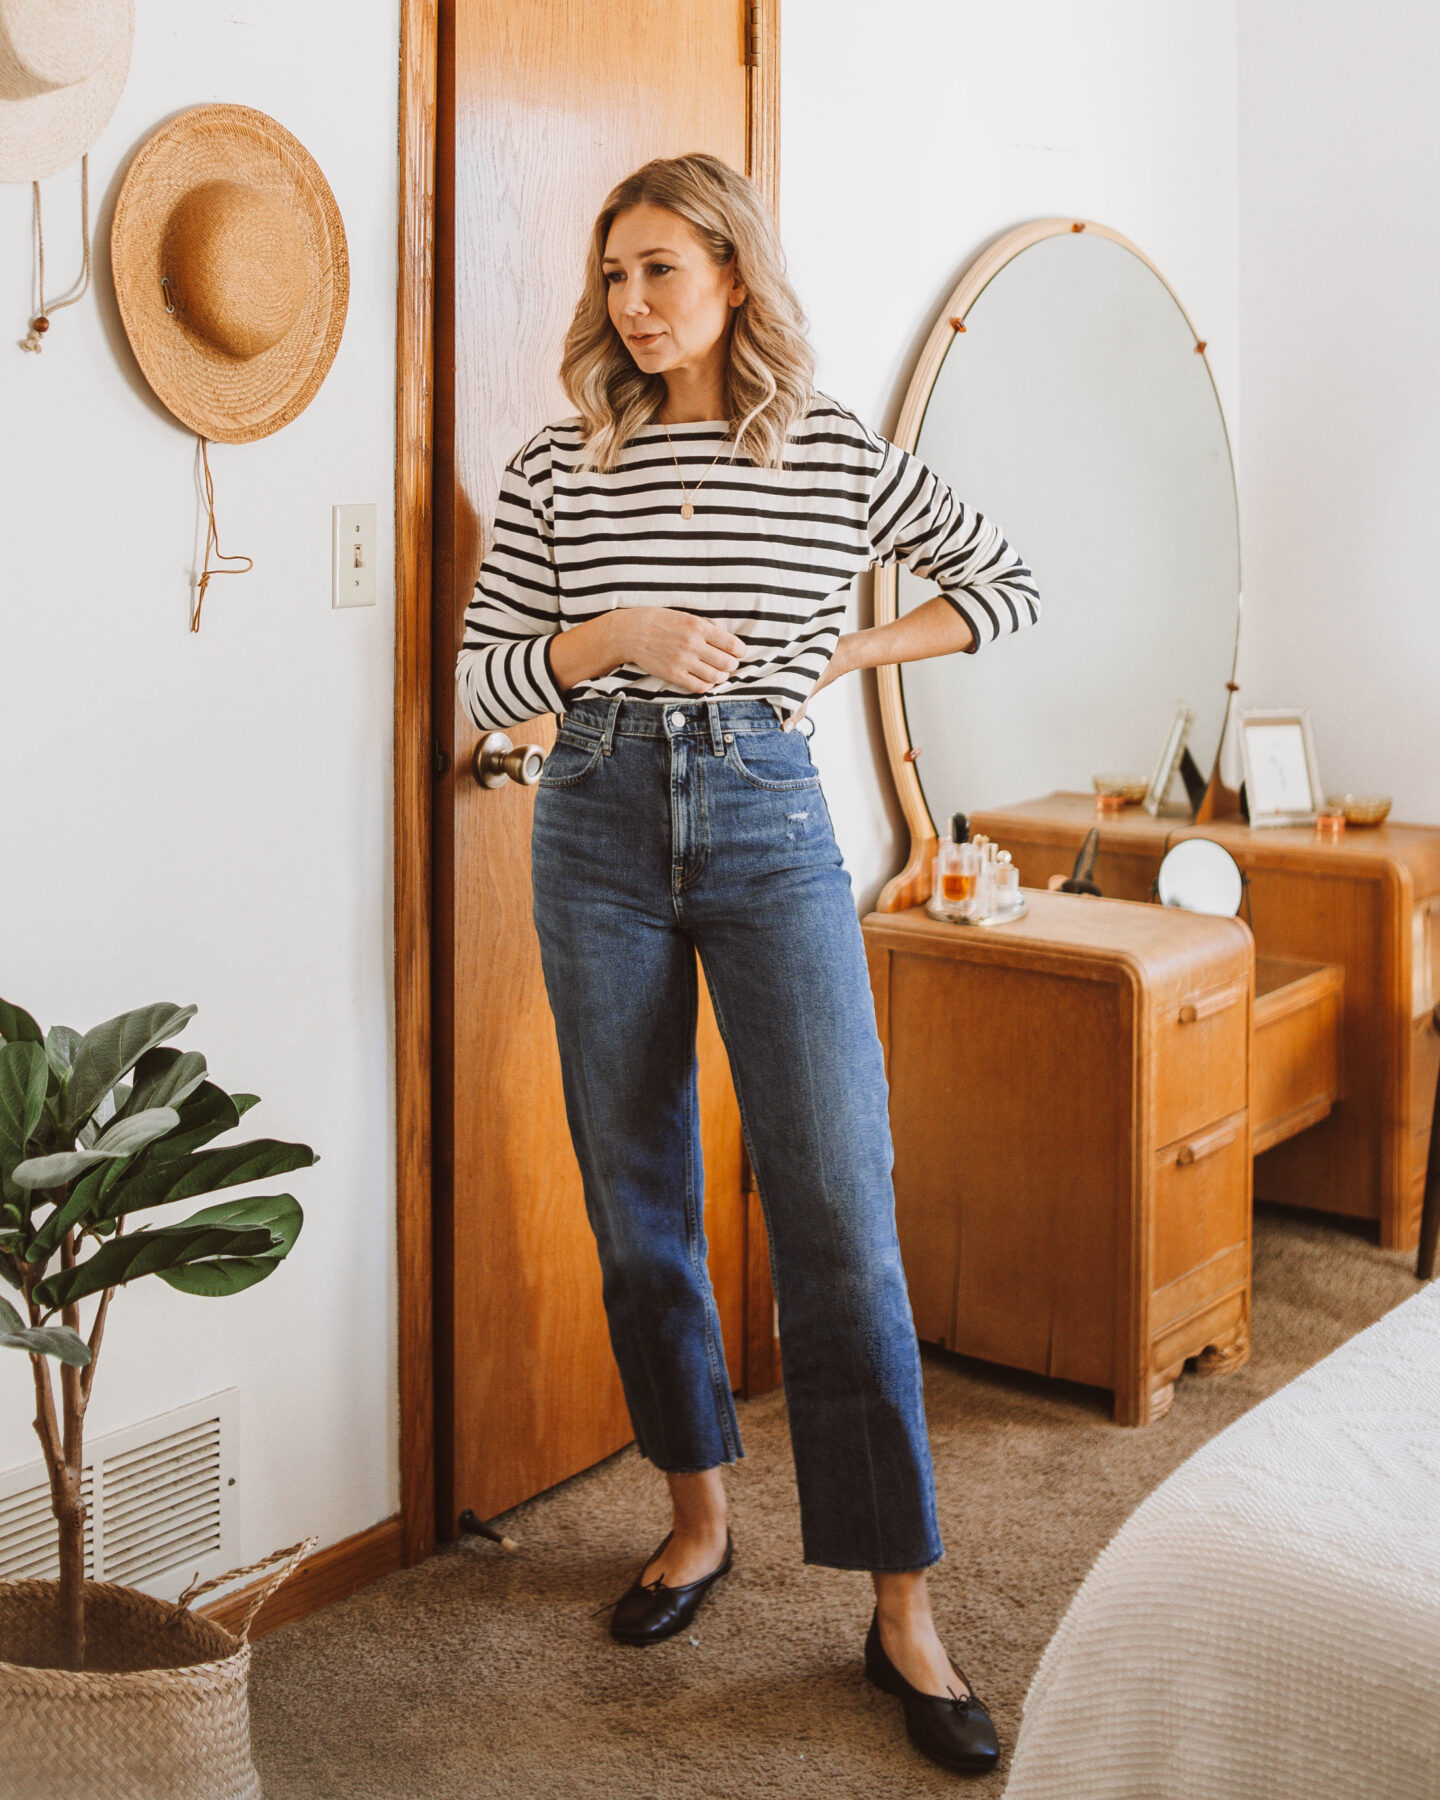 Karin Emily wears a breton black and white stripe tee, Everlane way high jeans, and black Everlane day gloves for her Everlane Denim Guide